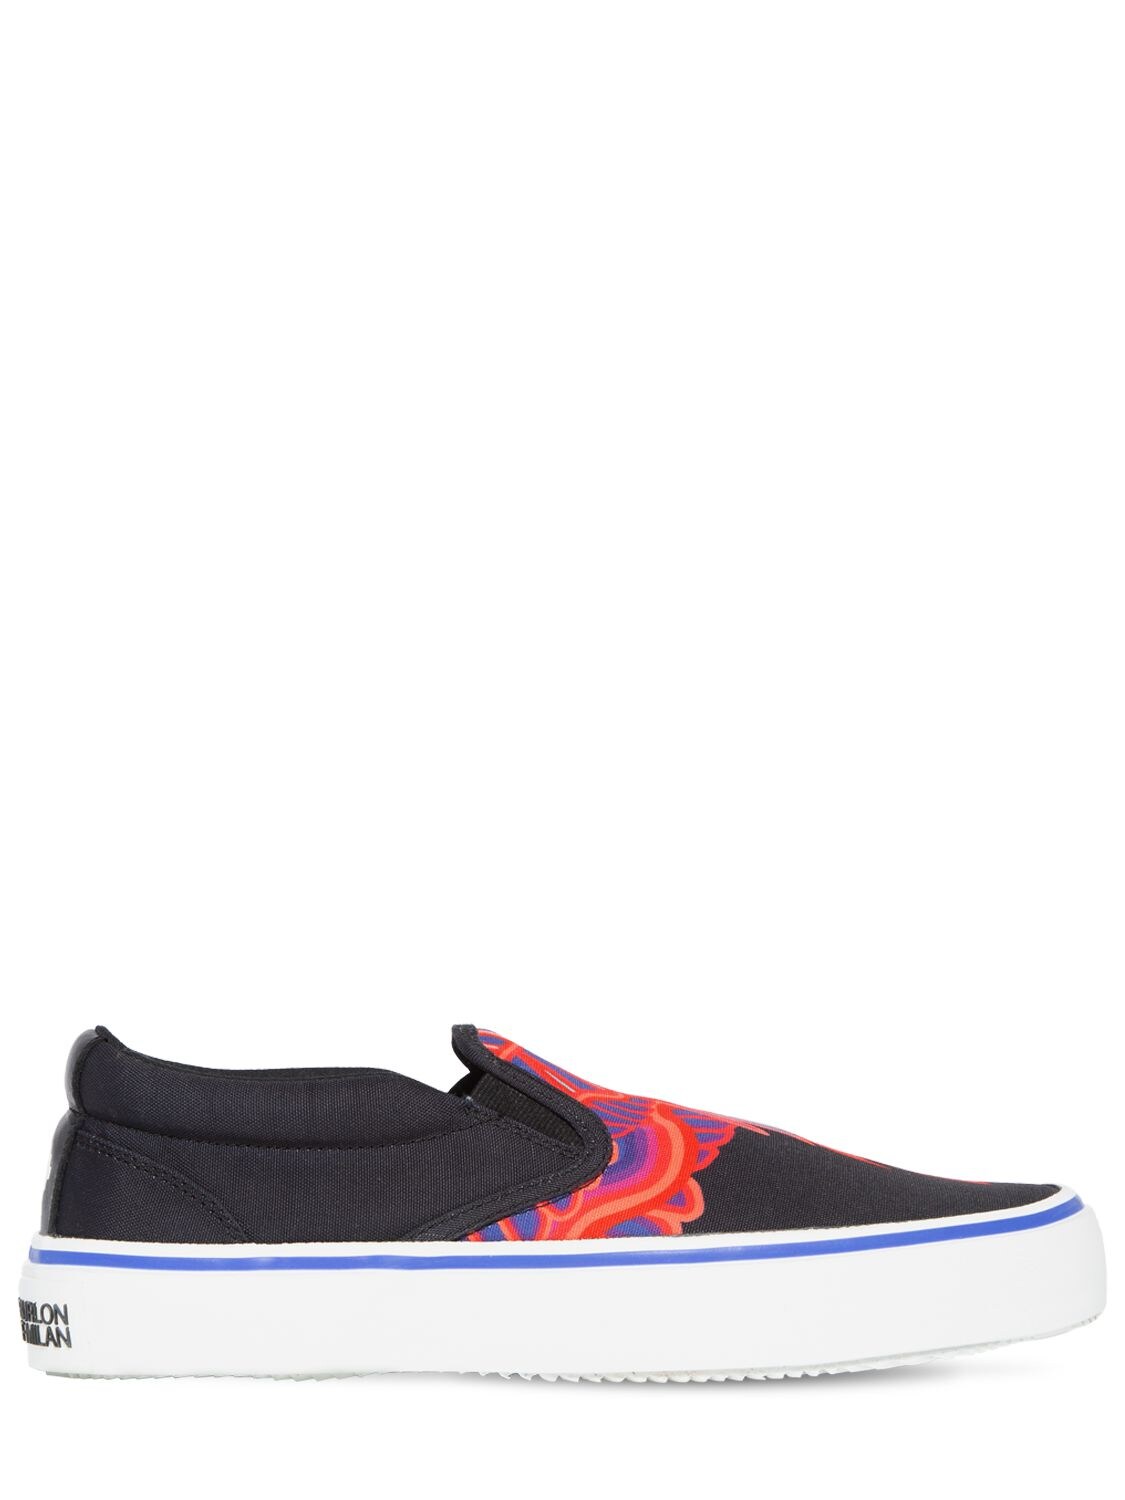 MARCELO BURLON COUNTY OF MILAN CURVES WINGS PRINT SLIP-ON trainers